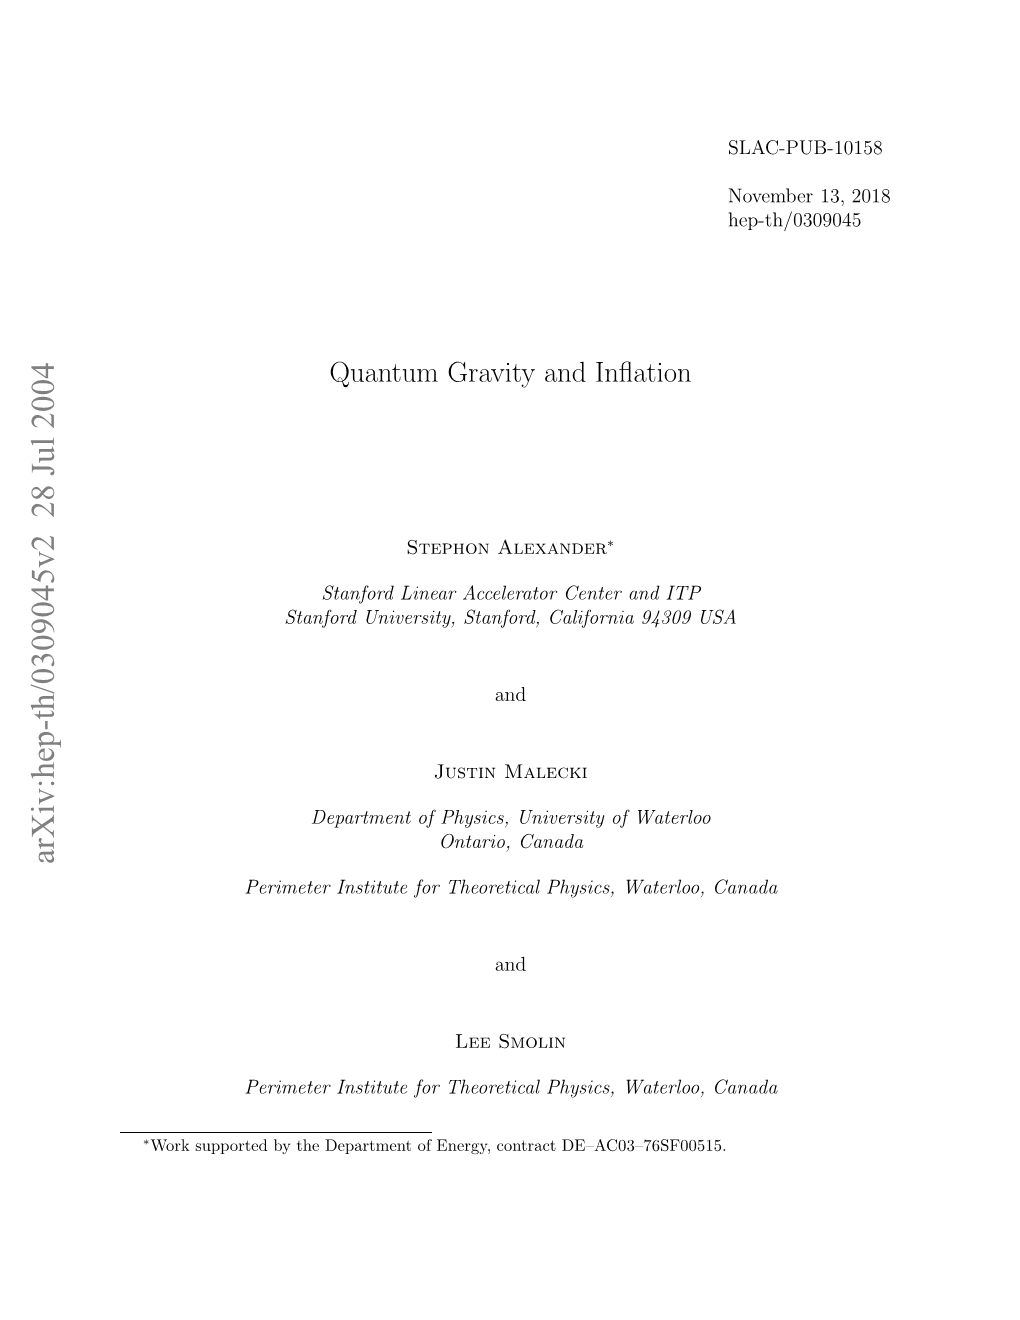 Quantum Gravity and Inflation